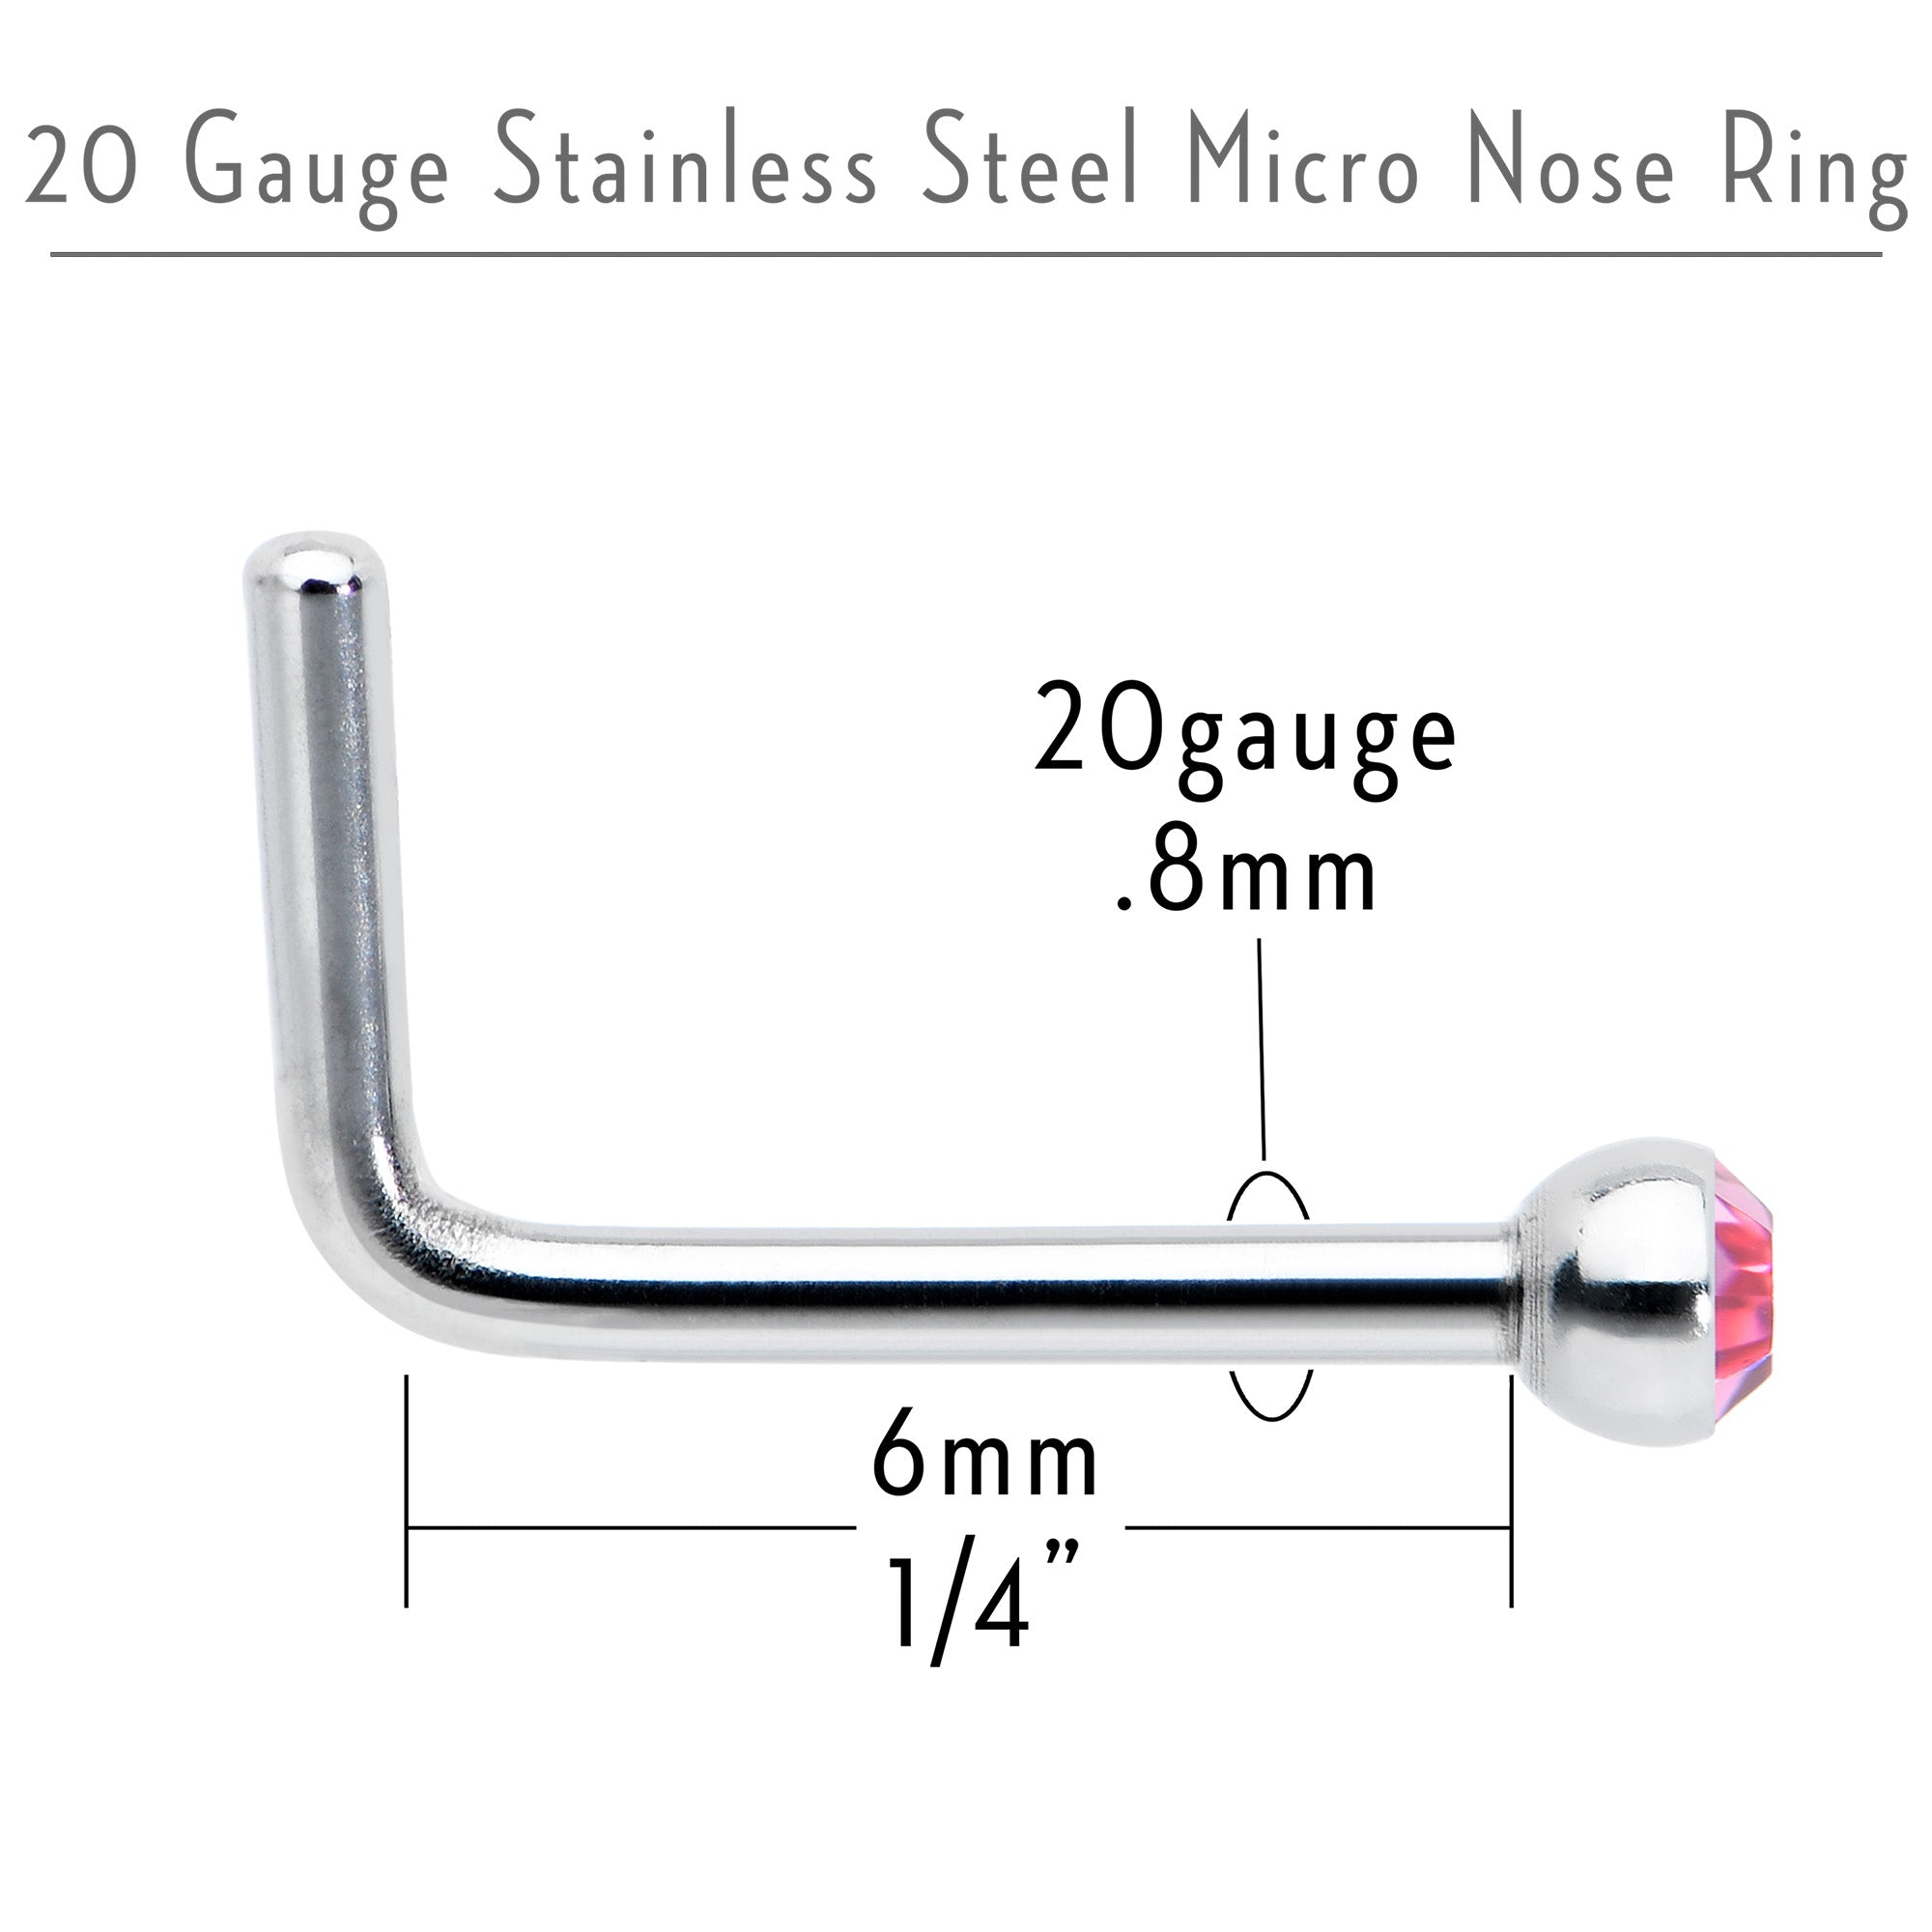 20 Gauge Stainless Steel Pink Gem Micro Nose Ring L-Shaped